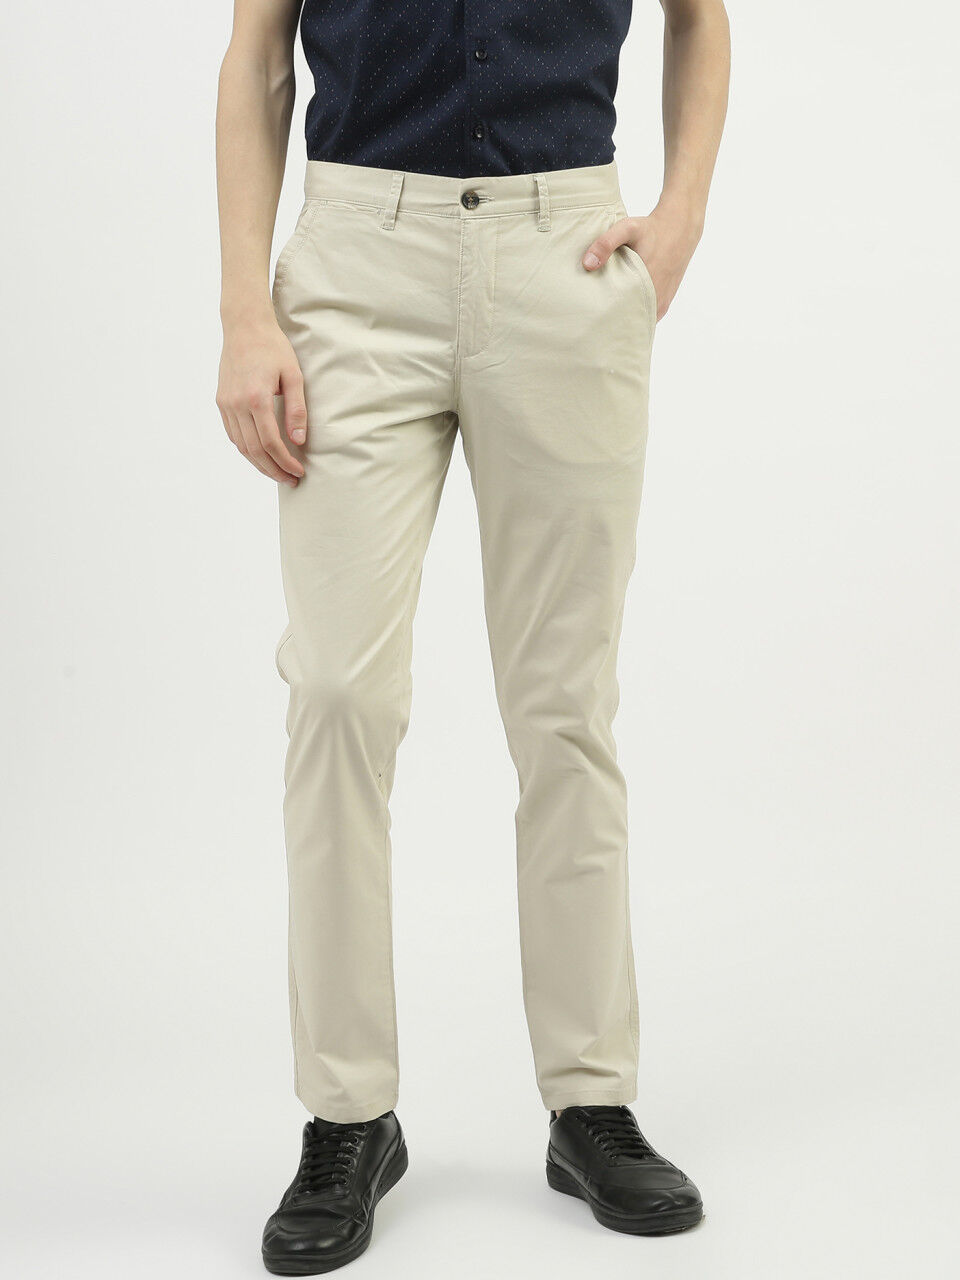 United Colors Of Benetton Off White Trousers  Buy United Colors Of Benetton  Off White Trousers online in India